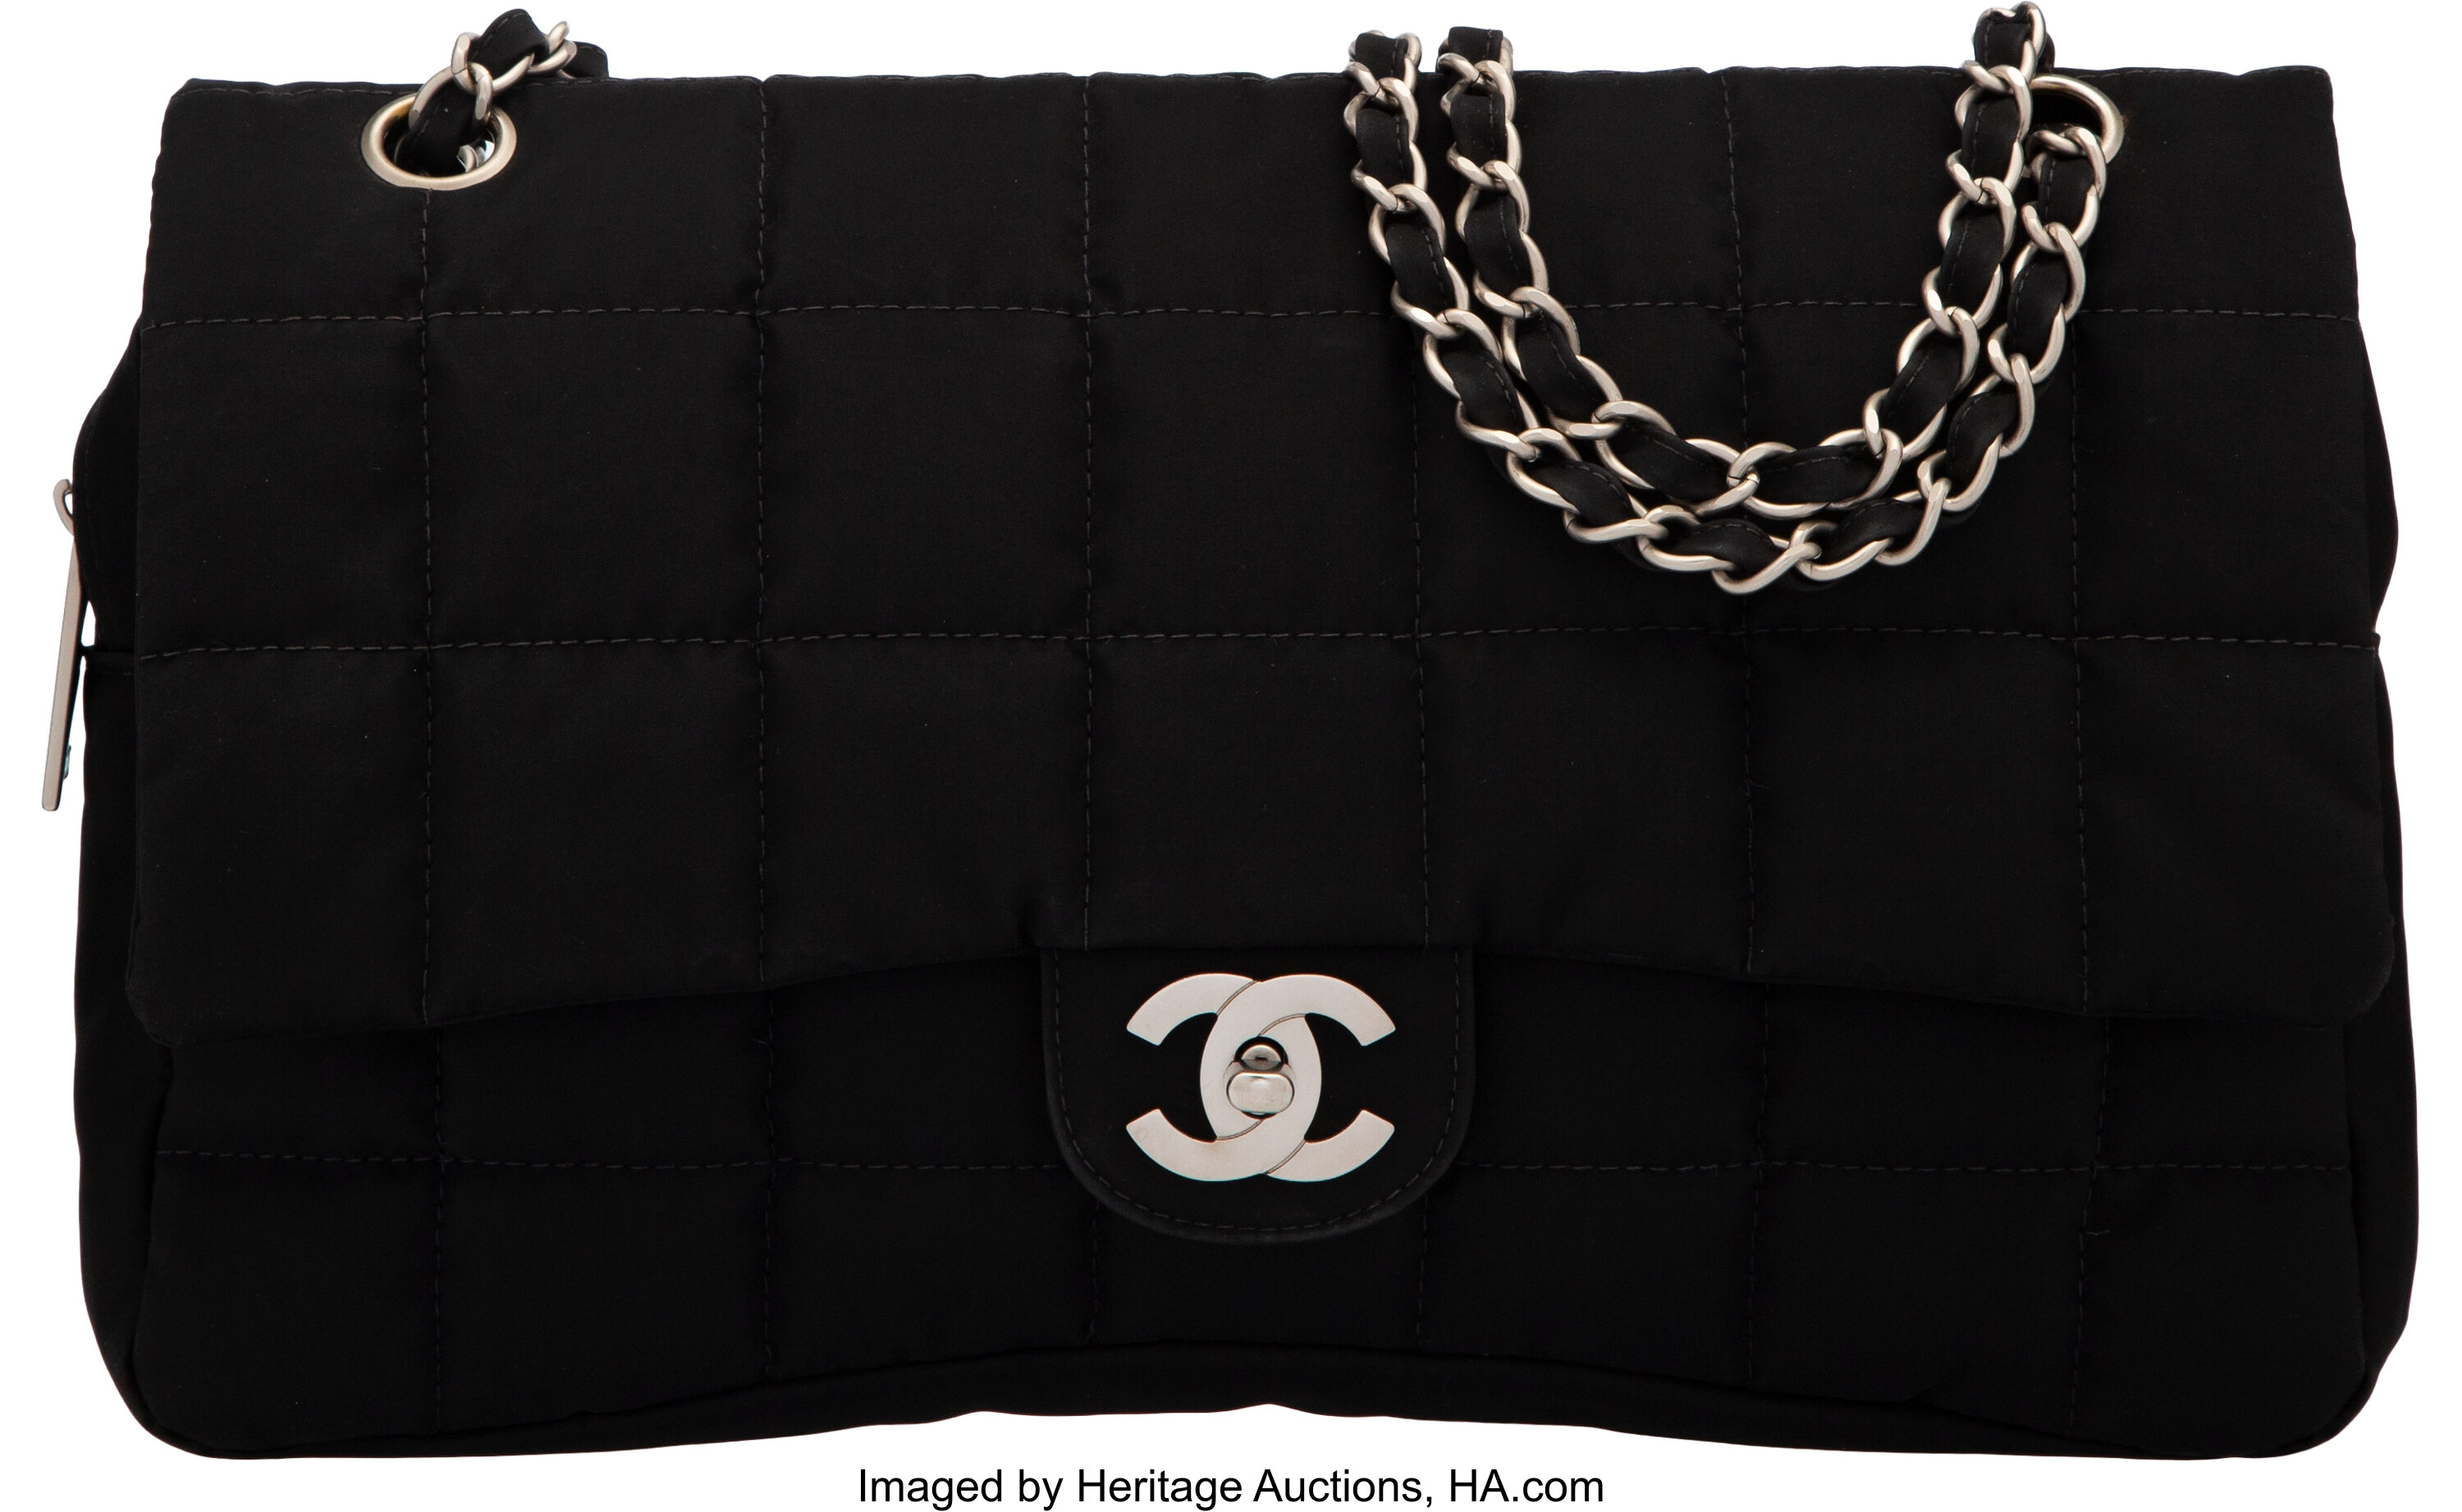 Chanel Black Quilted Nylon Flap Bag with Brushed Silver Hardware., Lot  #58221